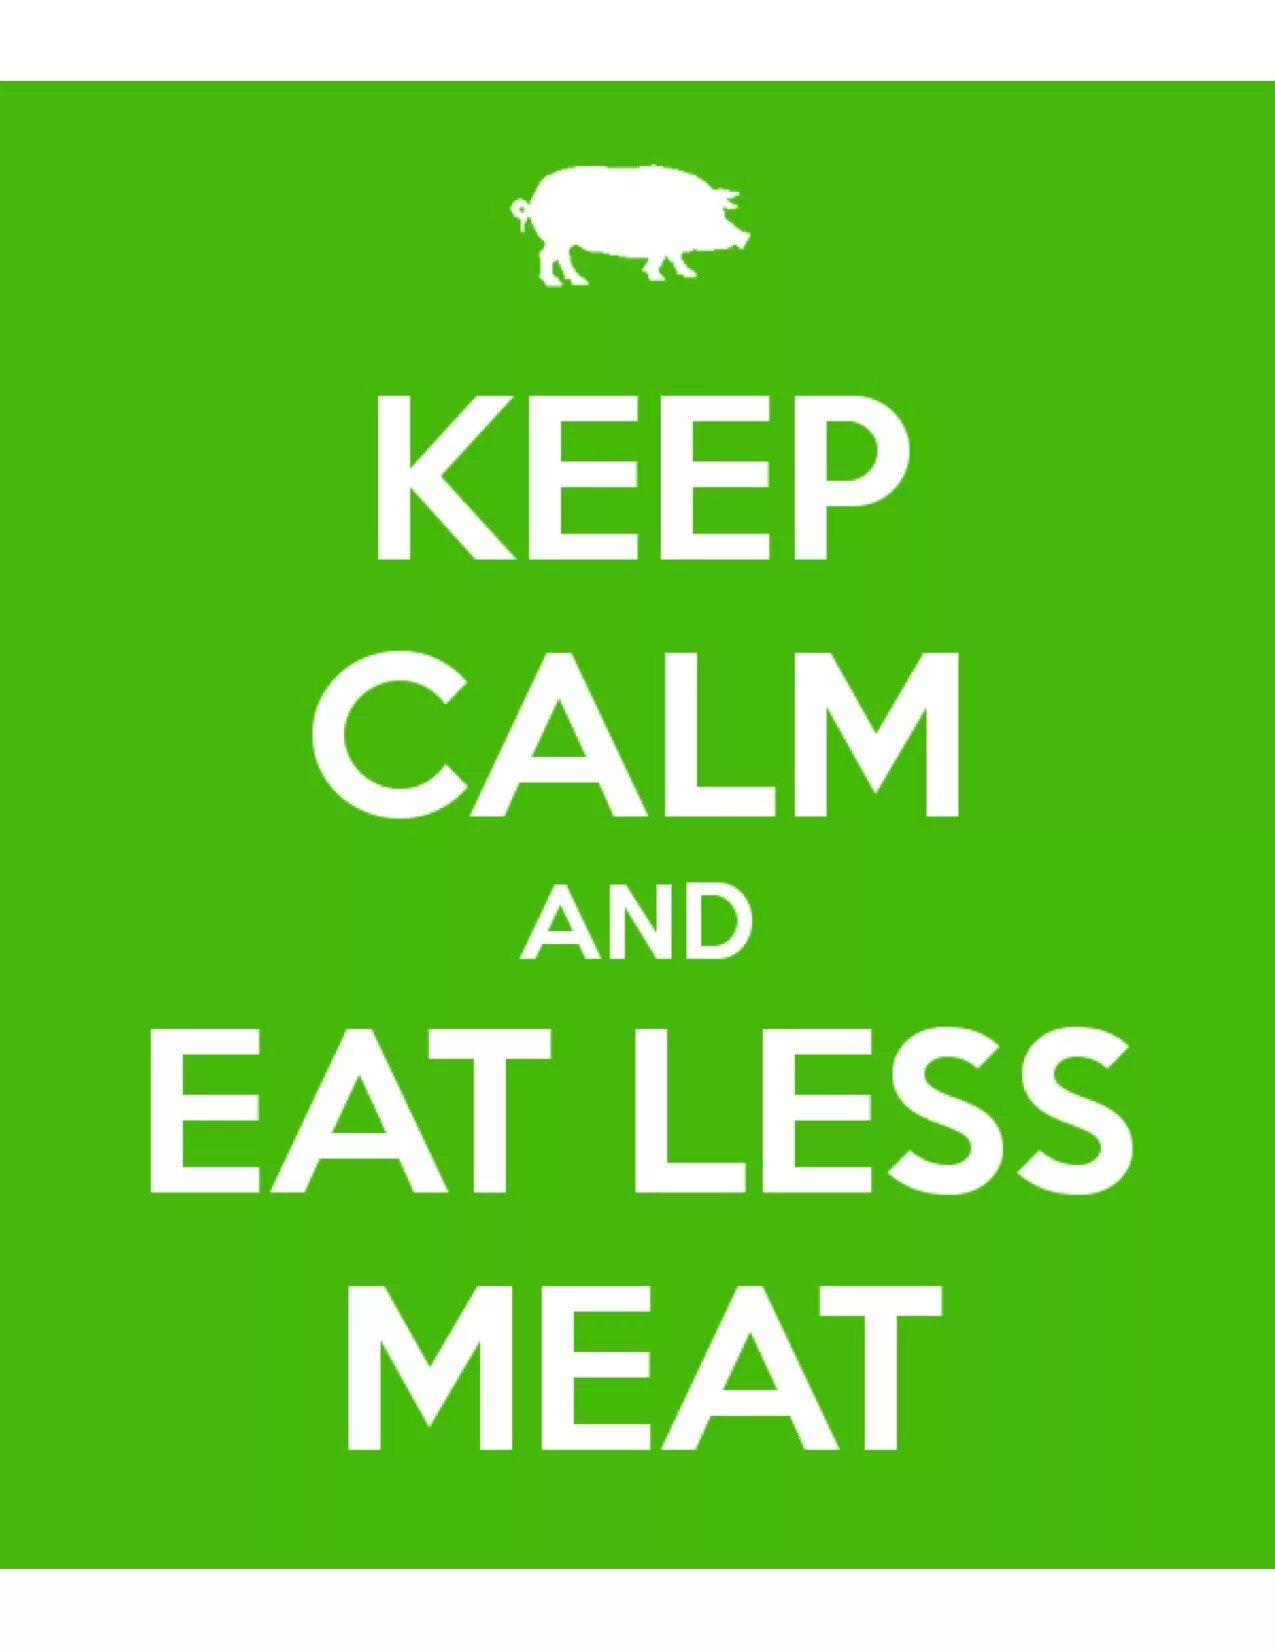 Eat less meat. Keep Calm and eat. Calm meat. Keep Calm and eat shit.